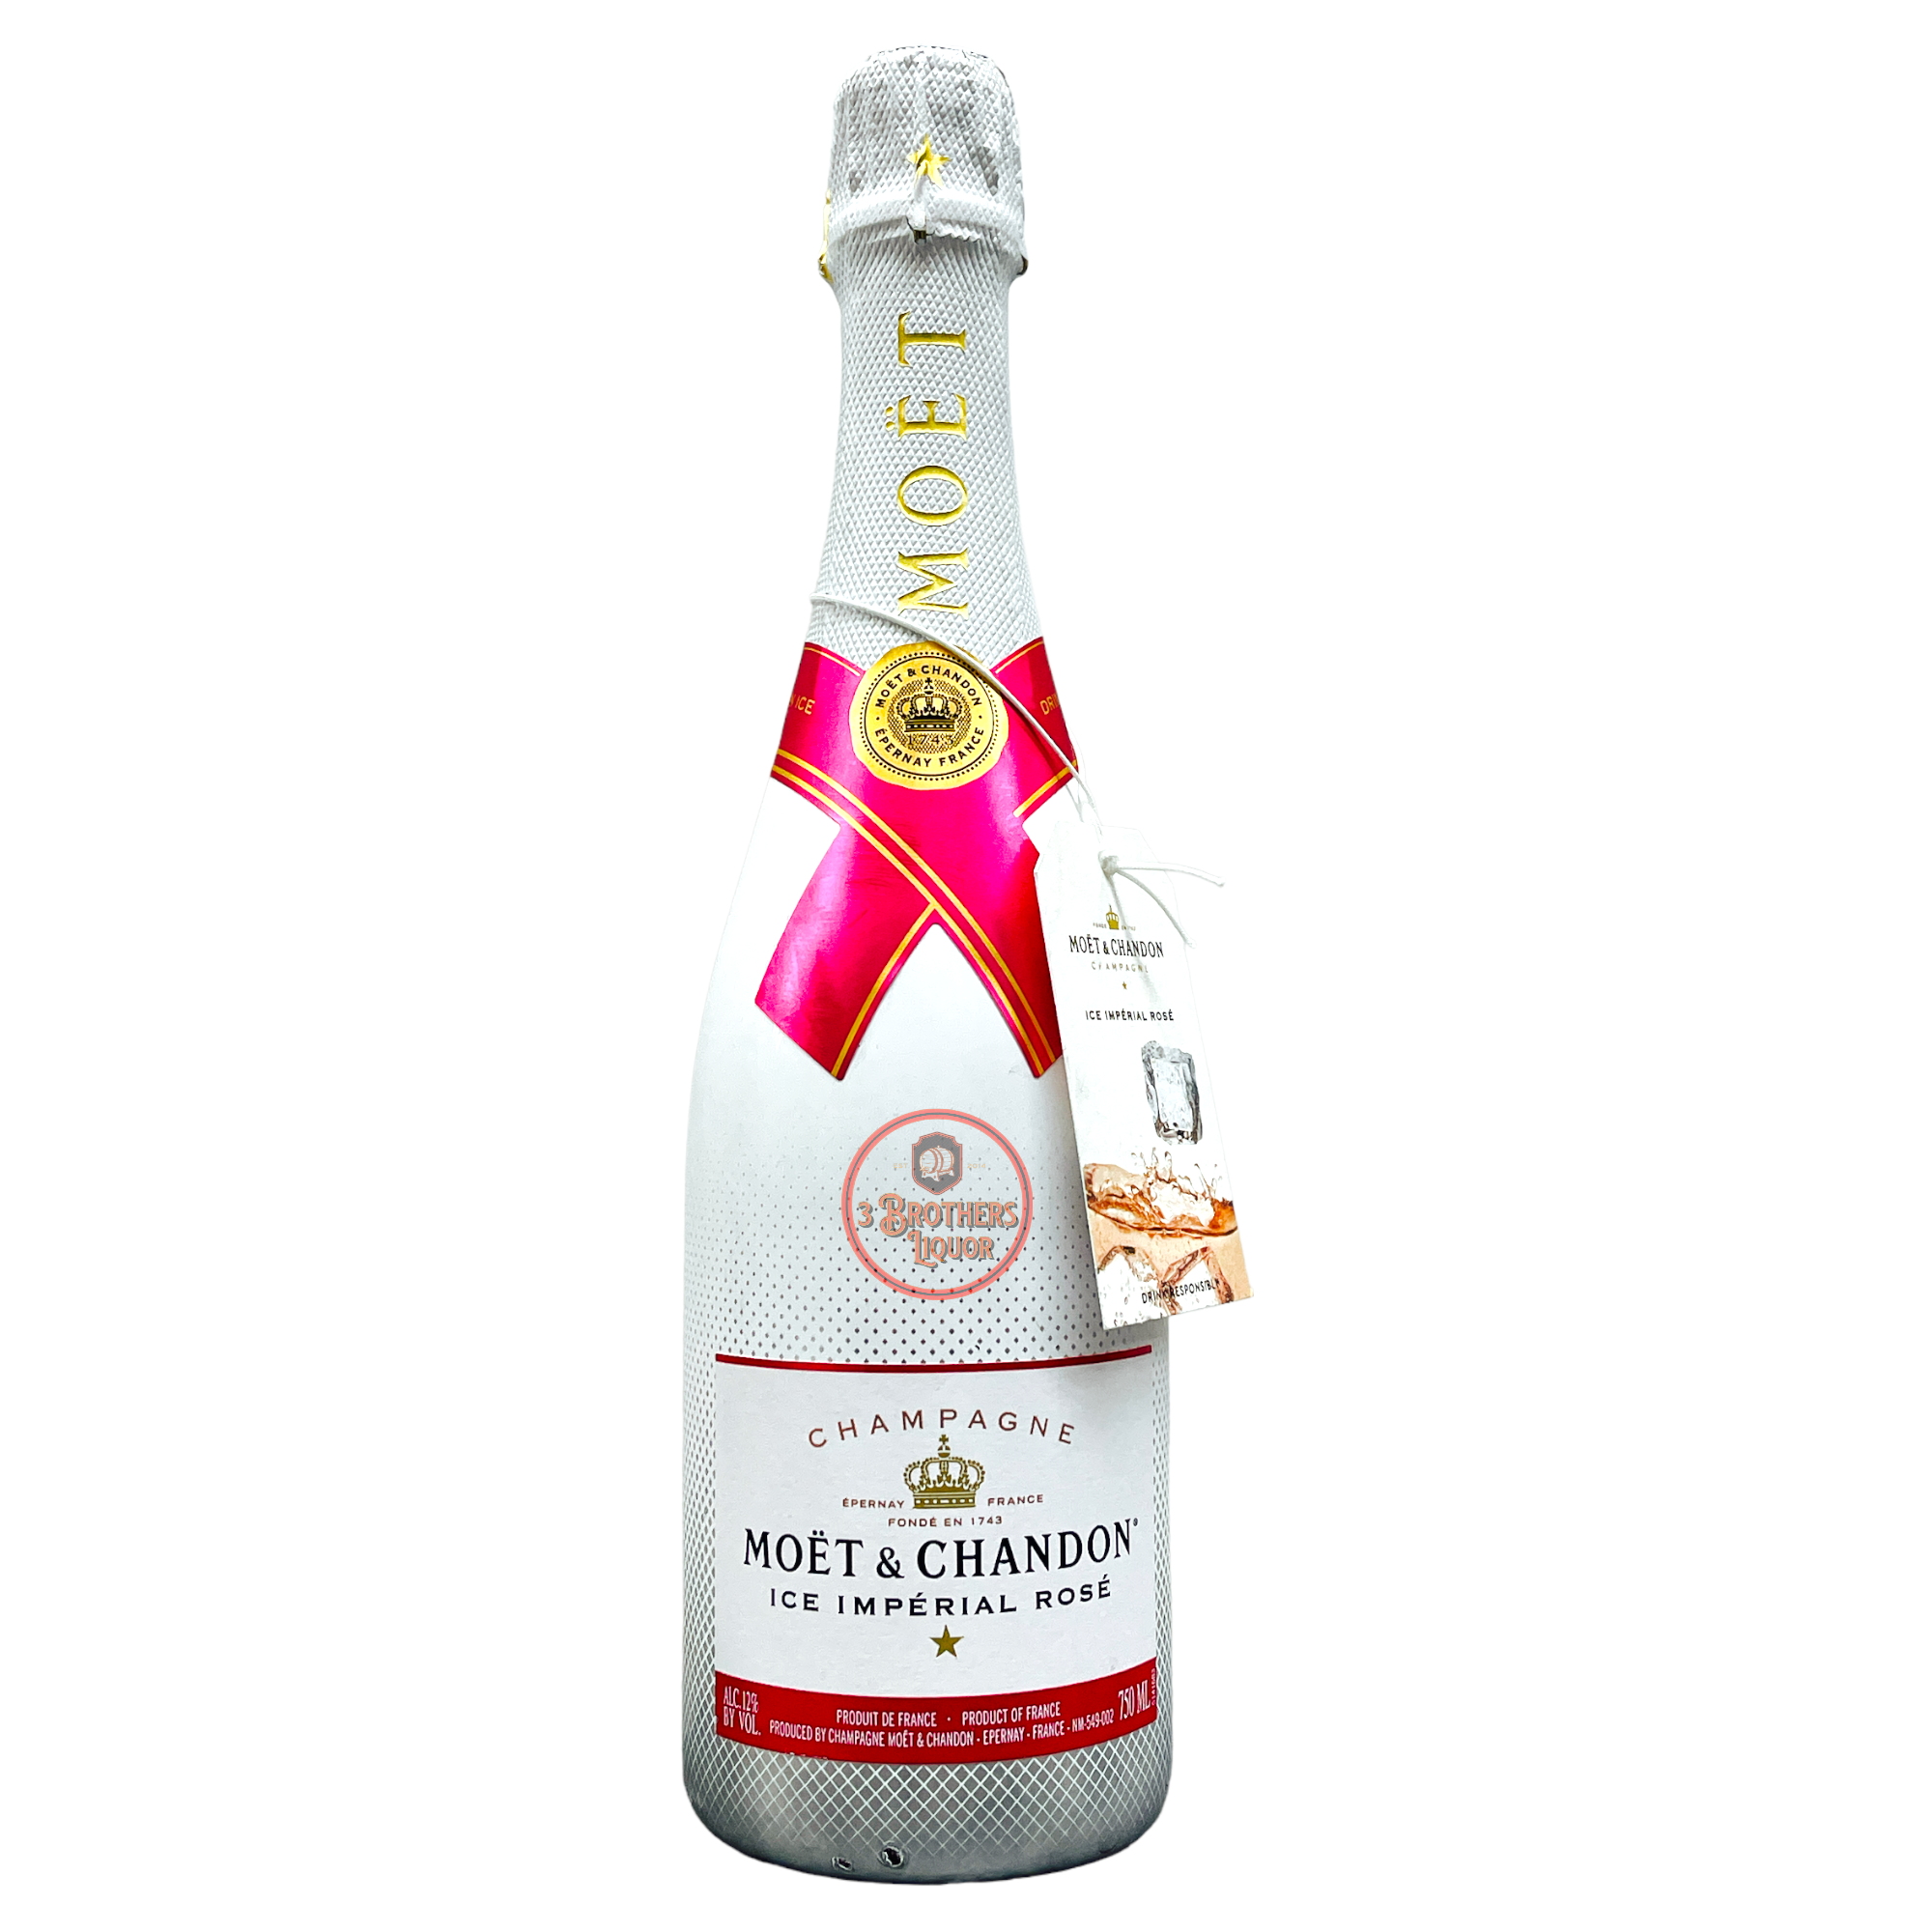 Moet & Chandon Ice Imperial Rose Sparkling Champagne